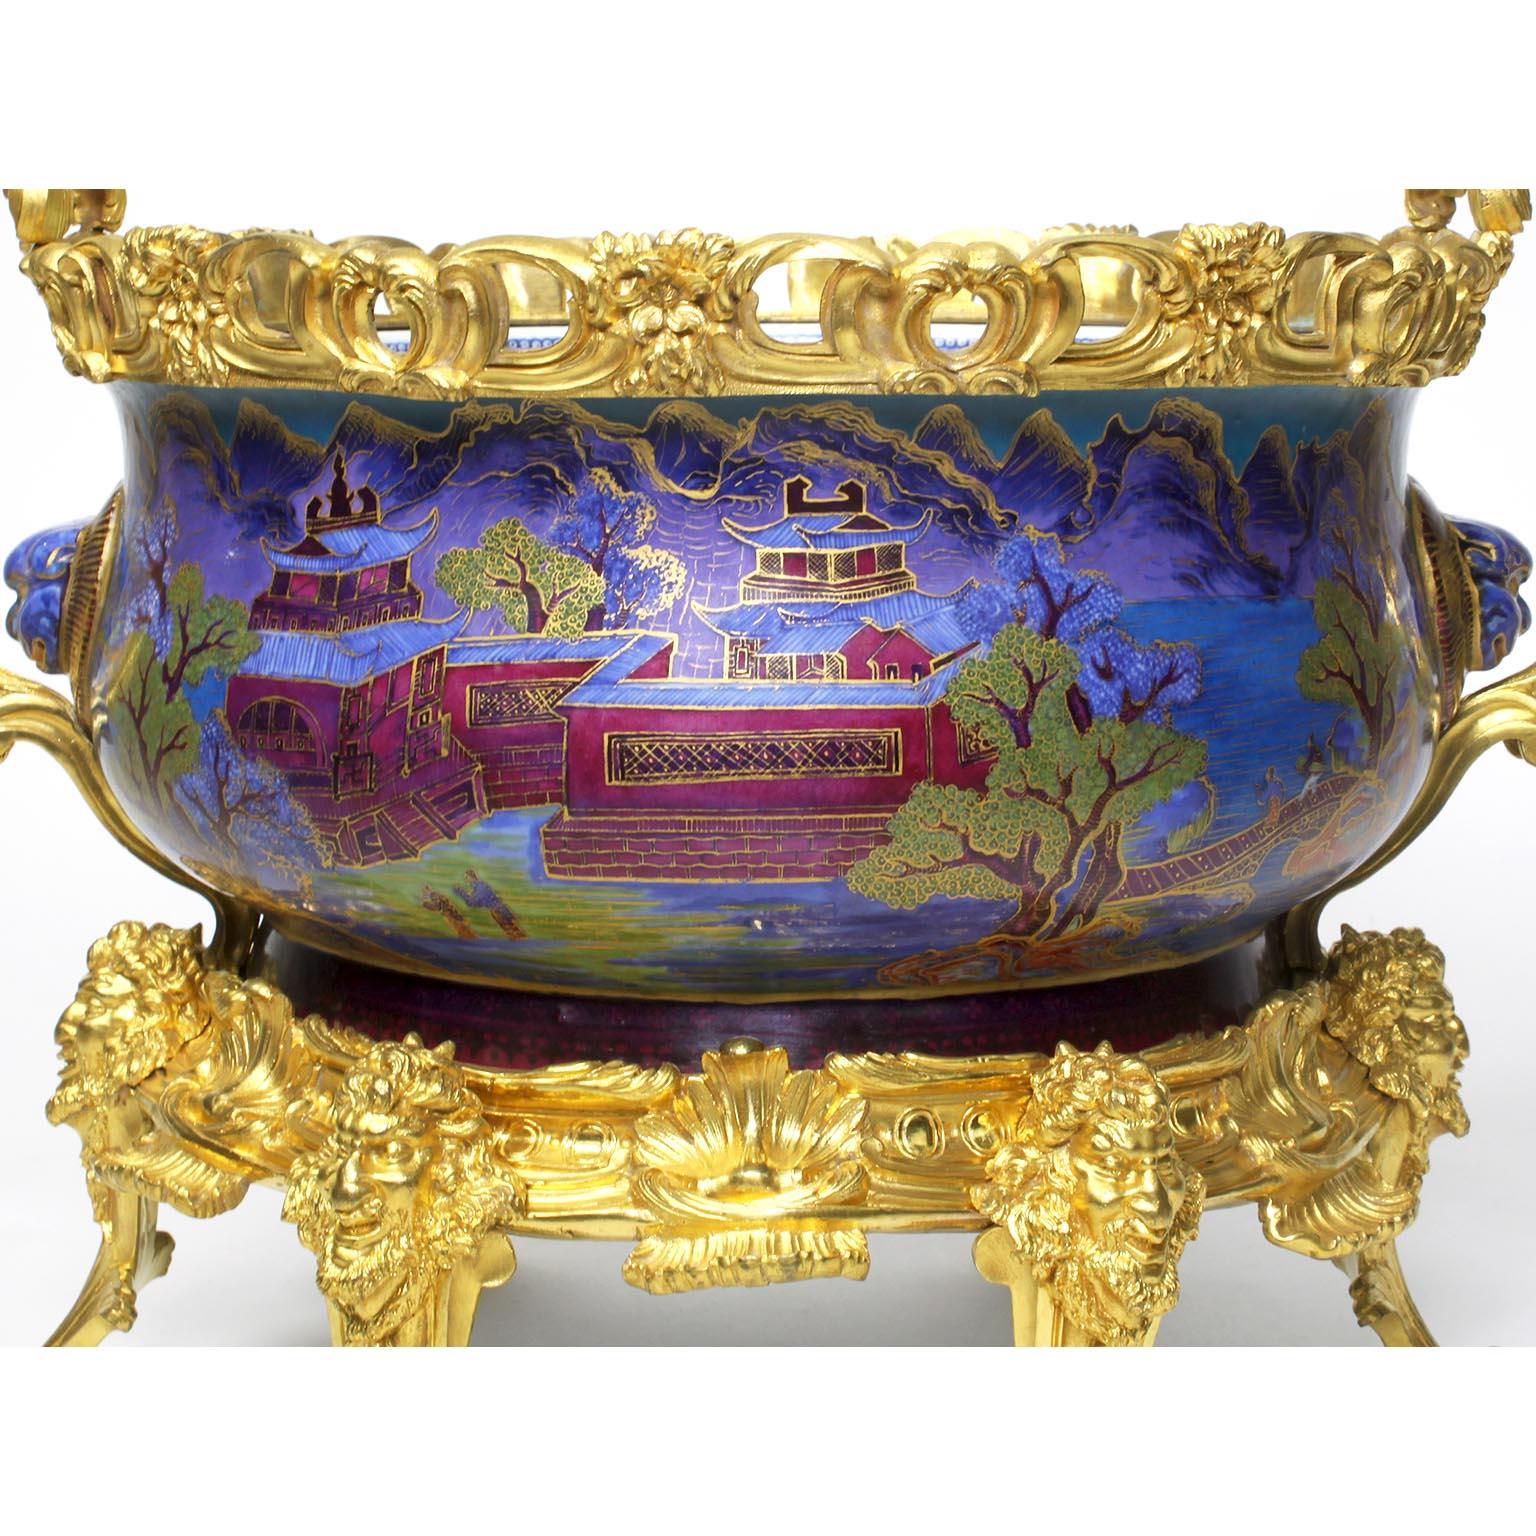 Chinese Export Famille Verte Porcelain & French Ormolu Chinoiserie Centerpiece For Sale 1